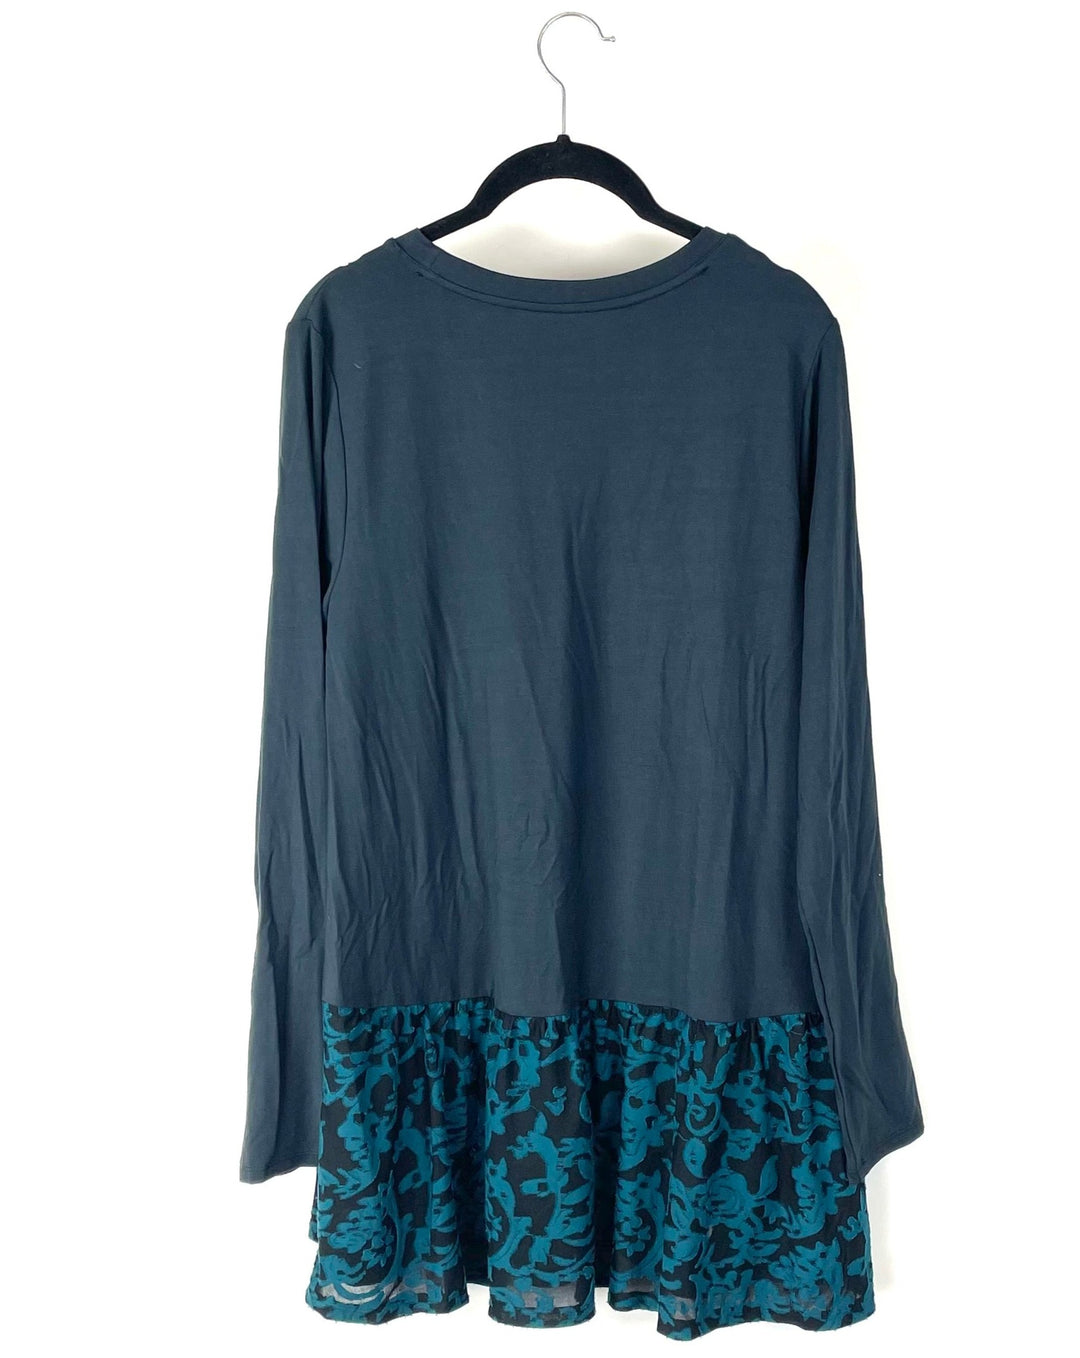 Navy Blue and Turquoise Lace Long Sleeve Top - Size 6-8